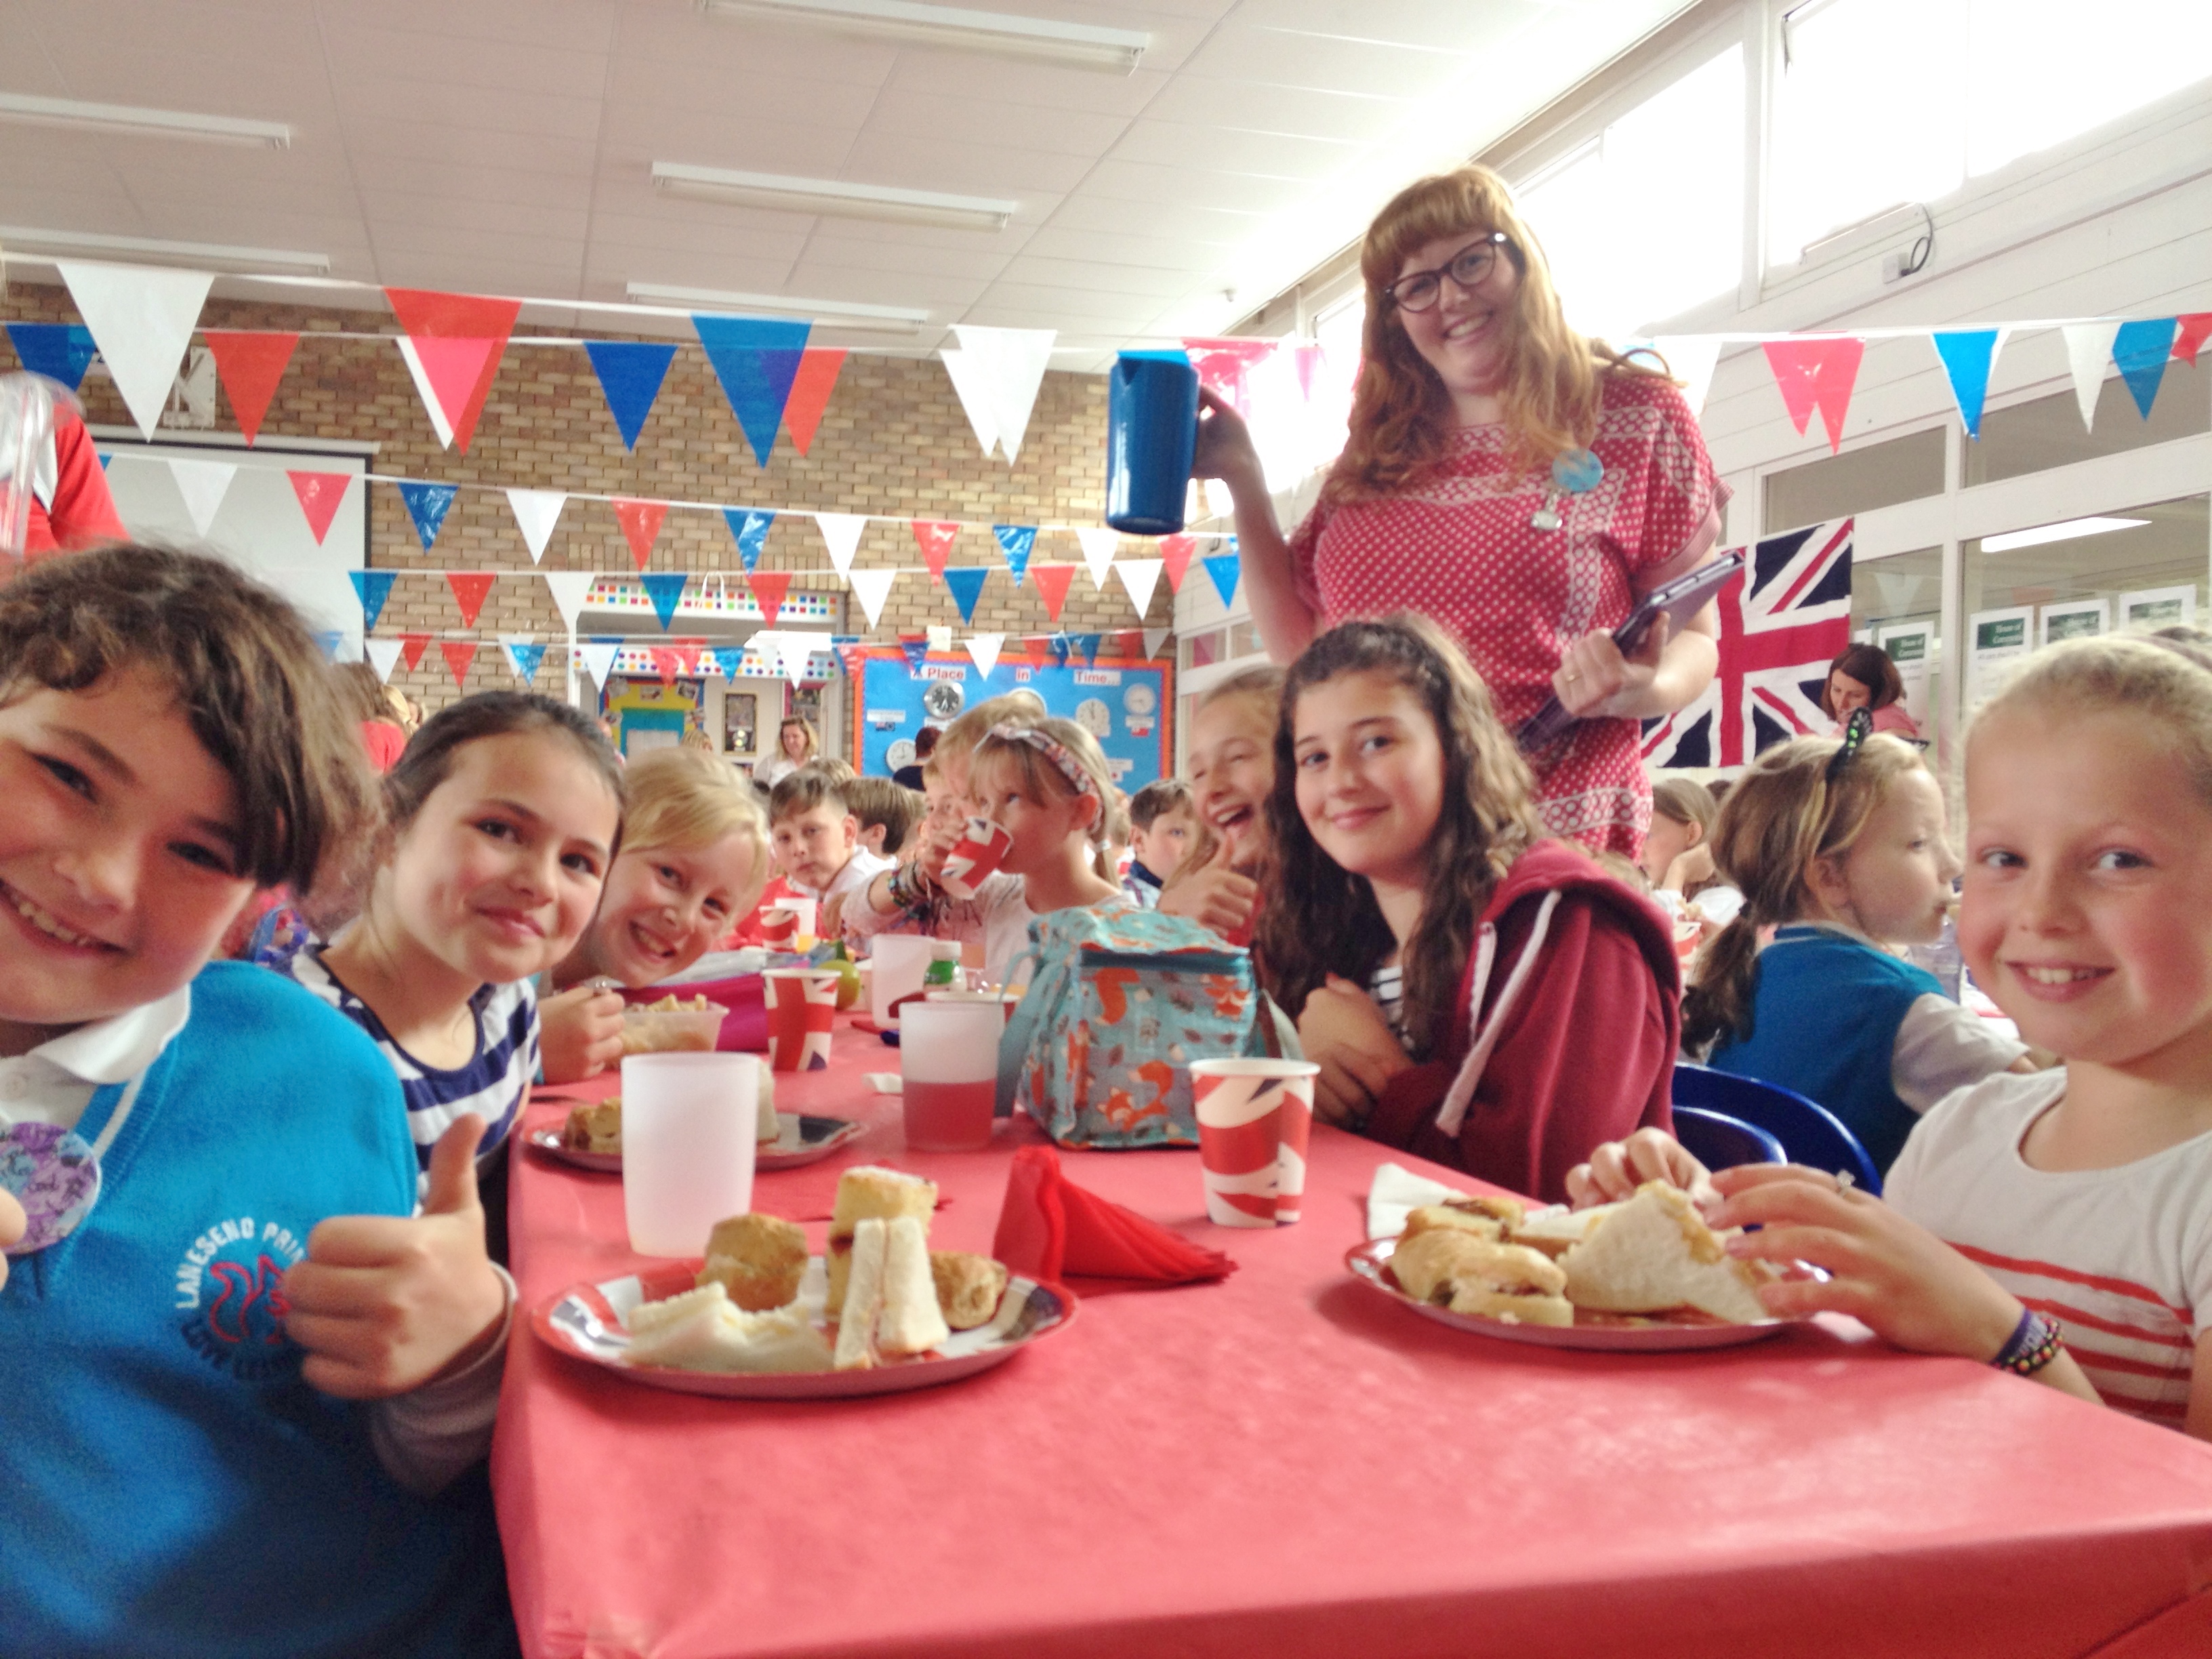 Check out our gallery for our fabulous 'royal tea' lunch!